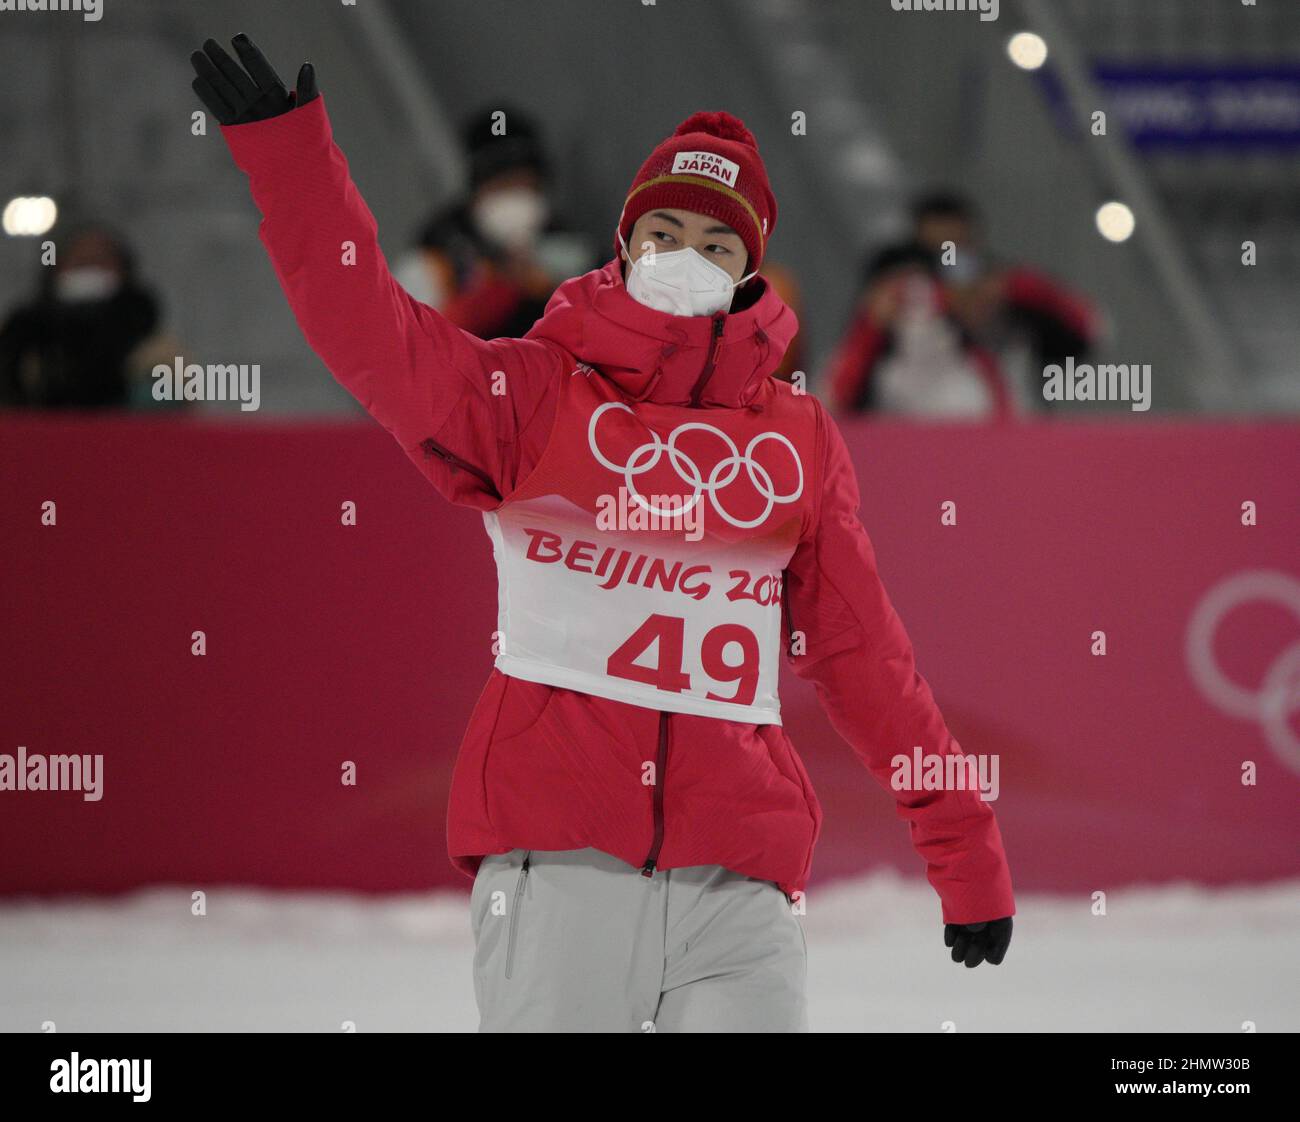 Zhangjiakou, China. 12th Feb, 2022. Silver medalist Ryoyu Kobayashi of Japan waves after the Men's Ski Jumping Individual Large Hill finals at the 2022 Winter Olympics in Zhangjiakou, China on Saturday, February 12, 2022. Norway's Marius Lindvik won the gold medal and Germany's Karl Geiger won the bronze medal. Photo by Bob Strong/UPI . Credit: UPI/Alamy Live News Stock Photo